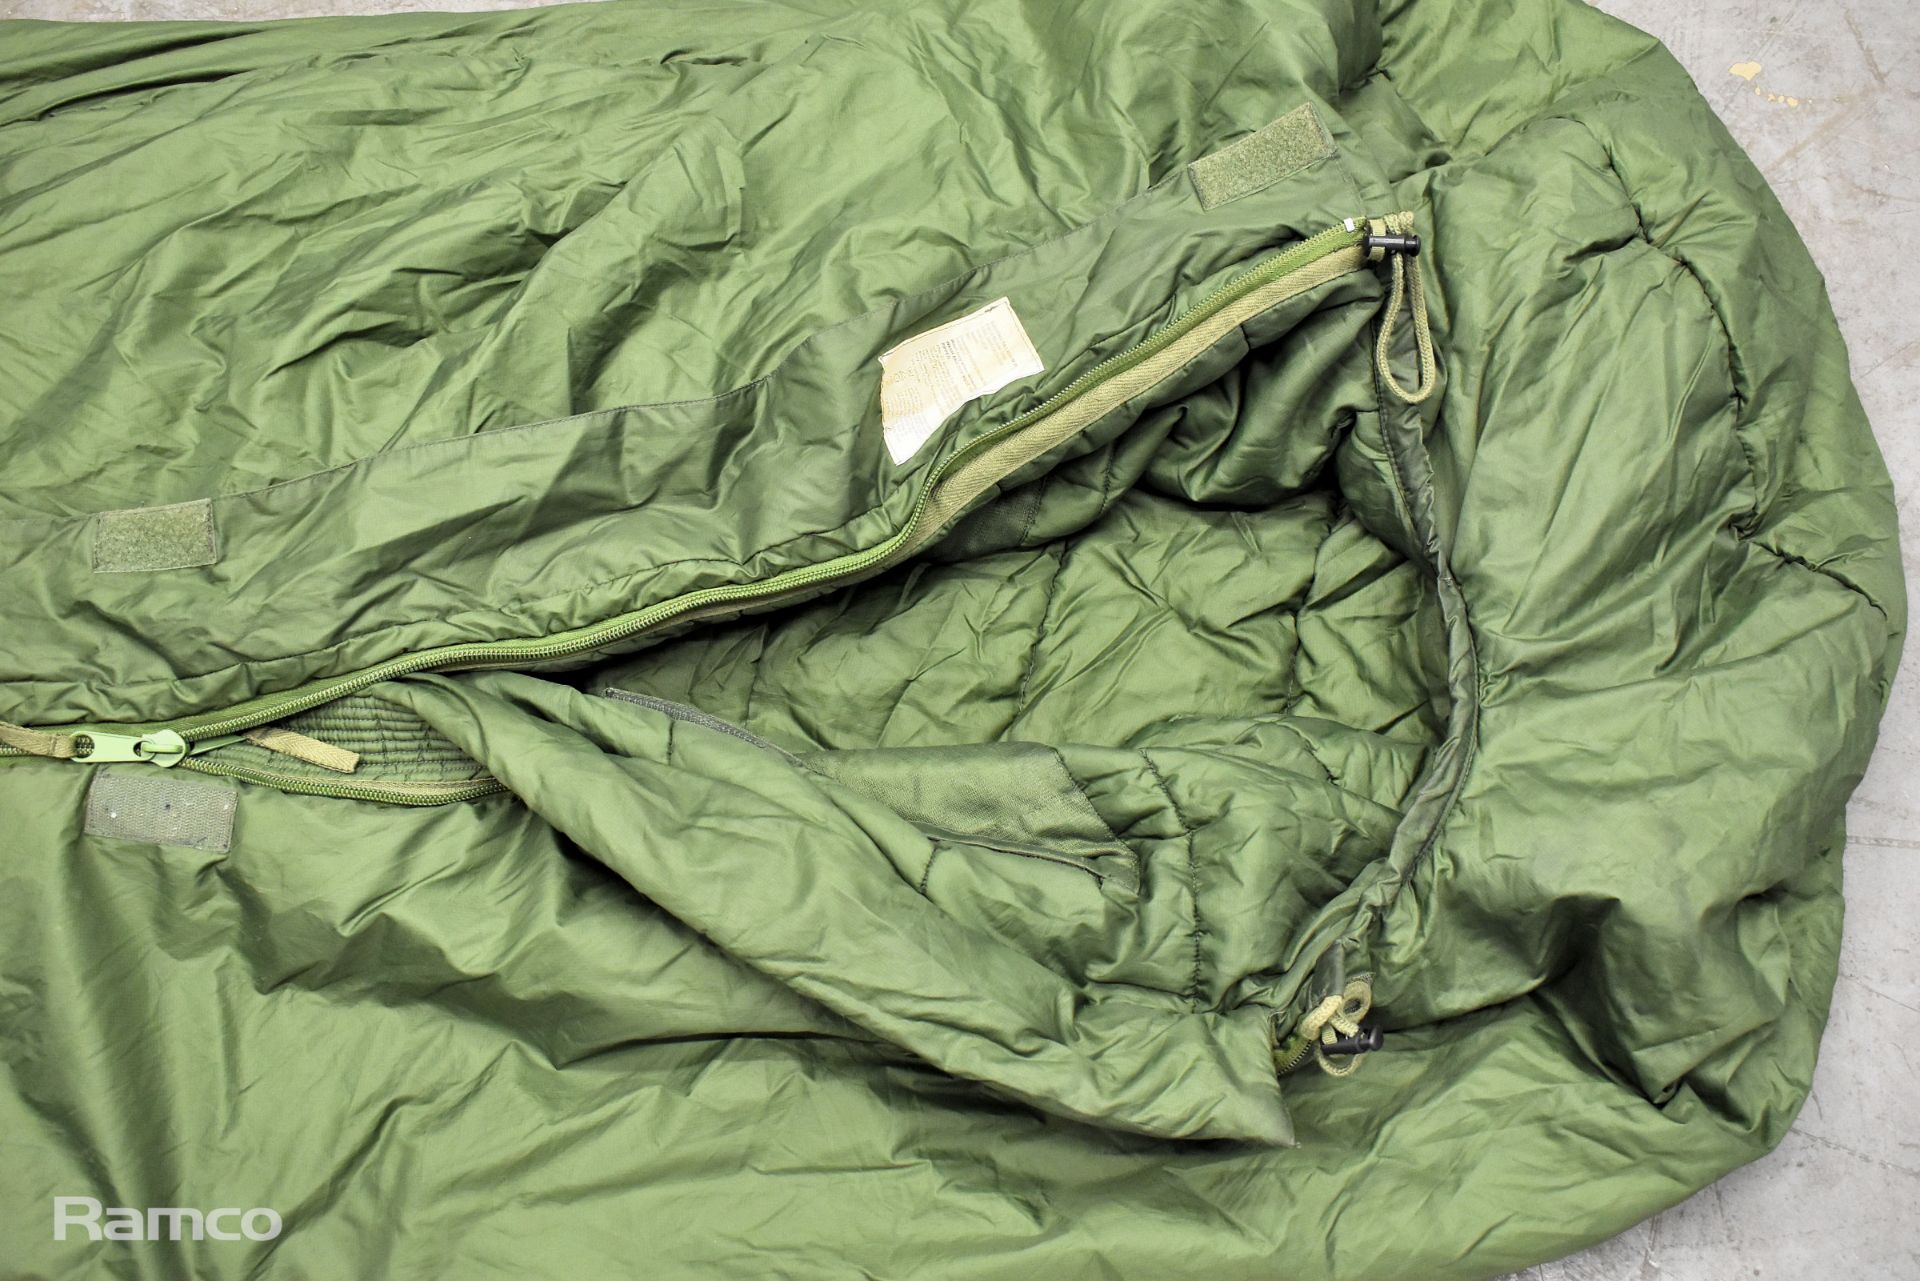 31x Sleeping bags - mixed grades and sizes - Image 8 of 8